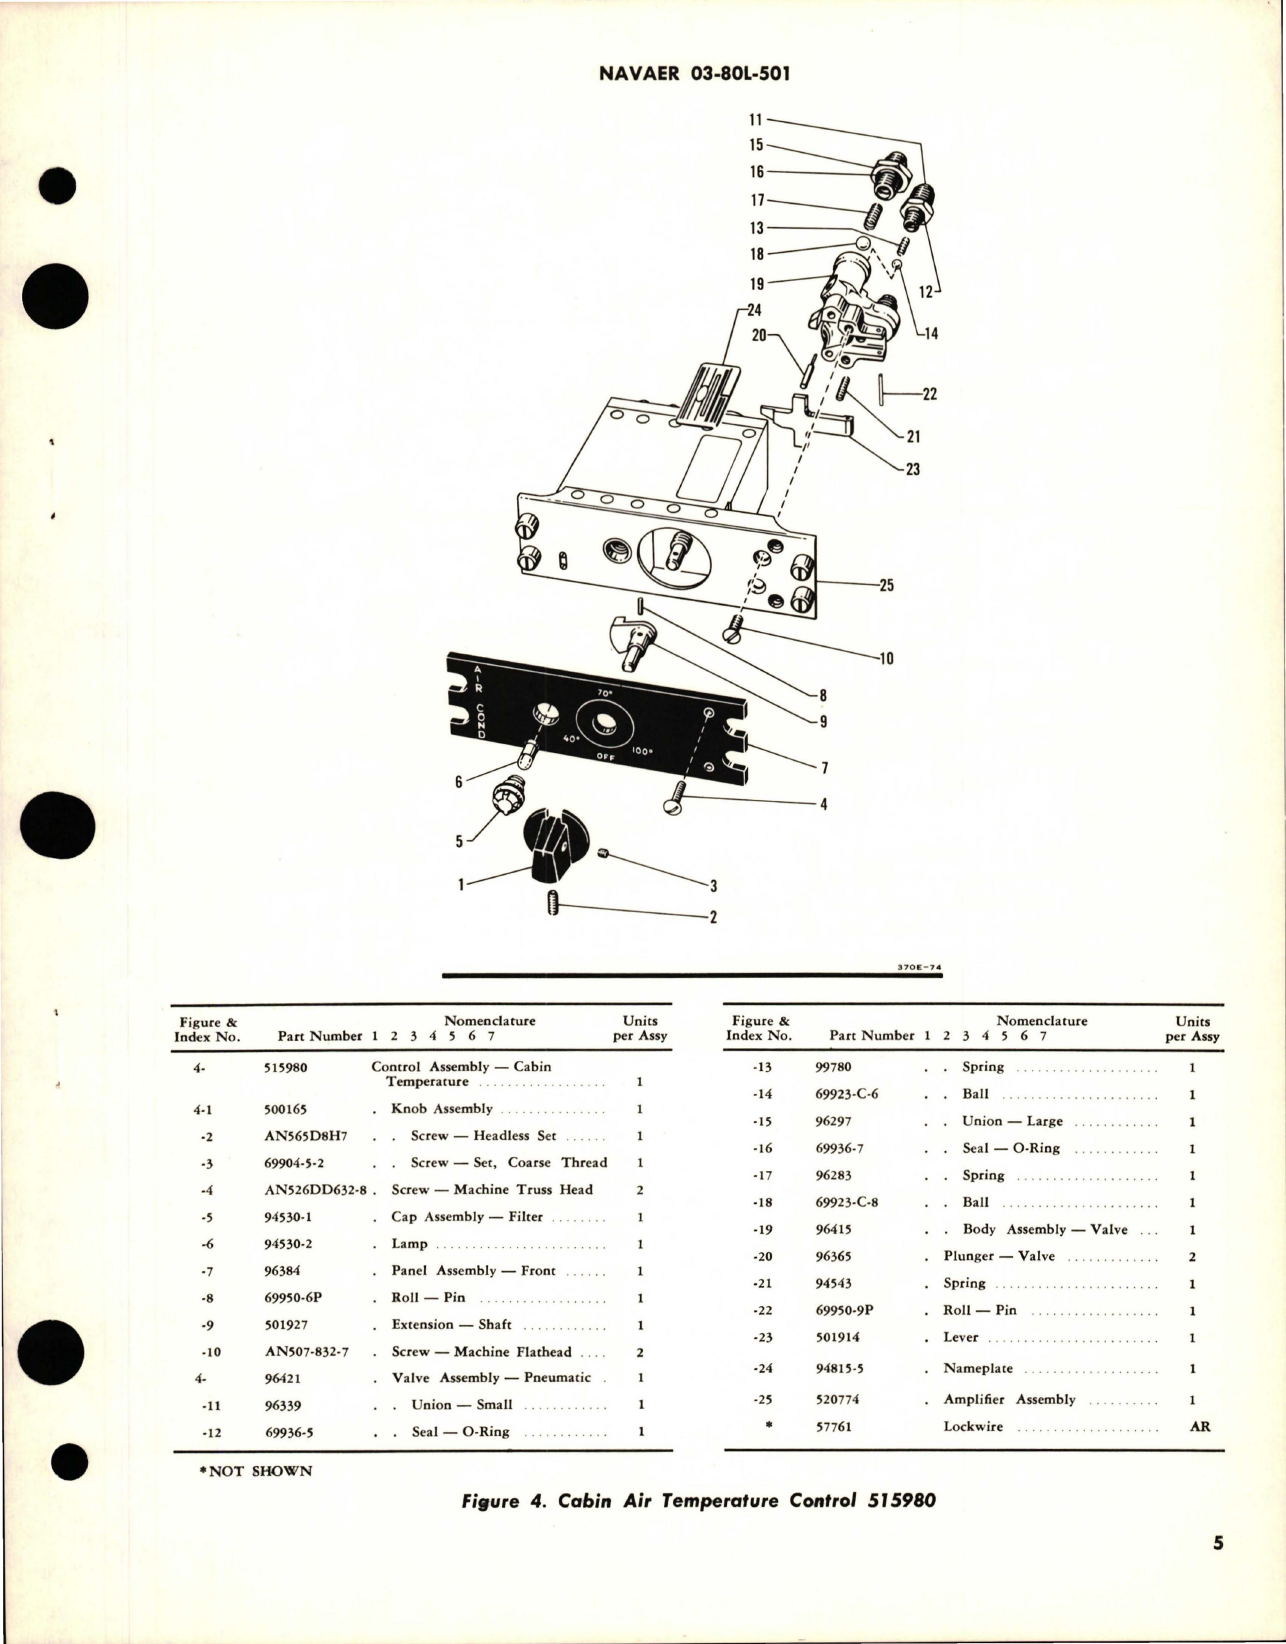 Sample page 5 from AirCorps Library document: Overhaul Instructions with Parts for Cabin Temperature Control Assembly - 515980